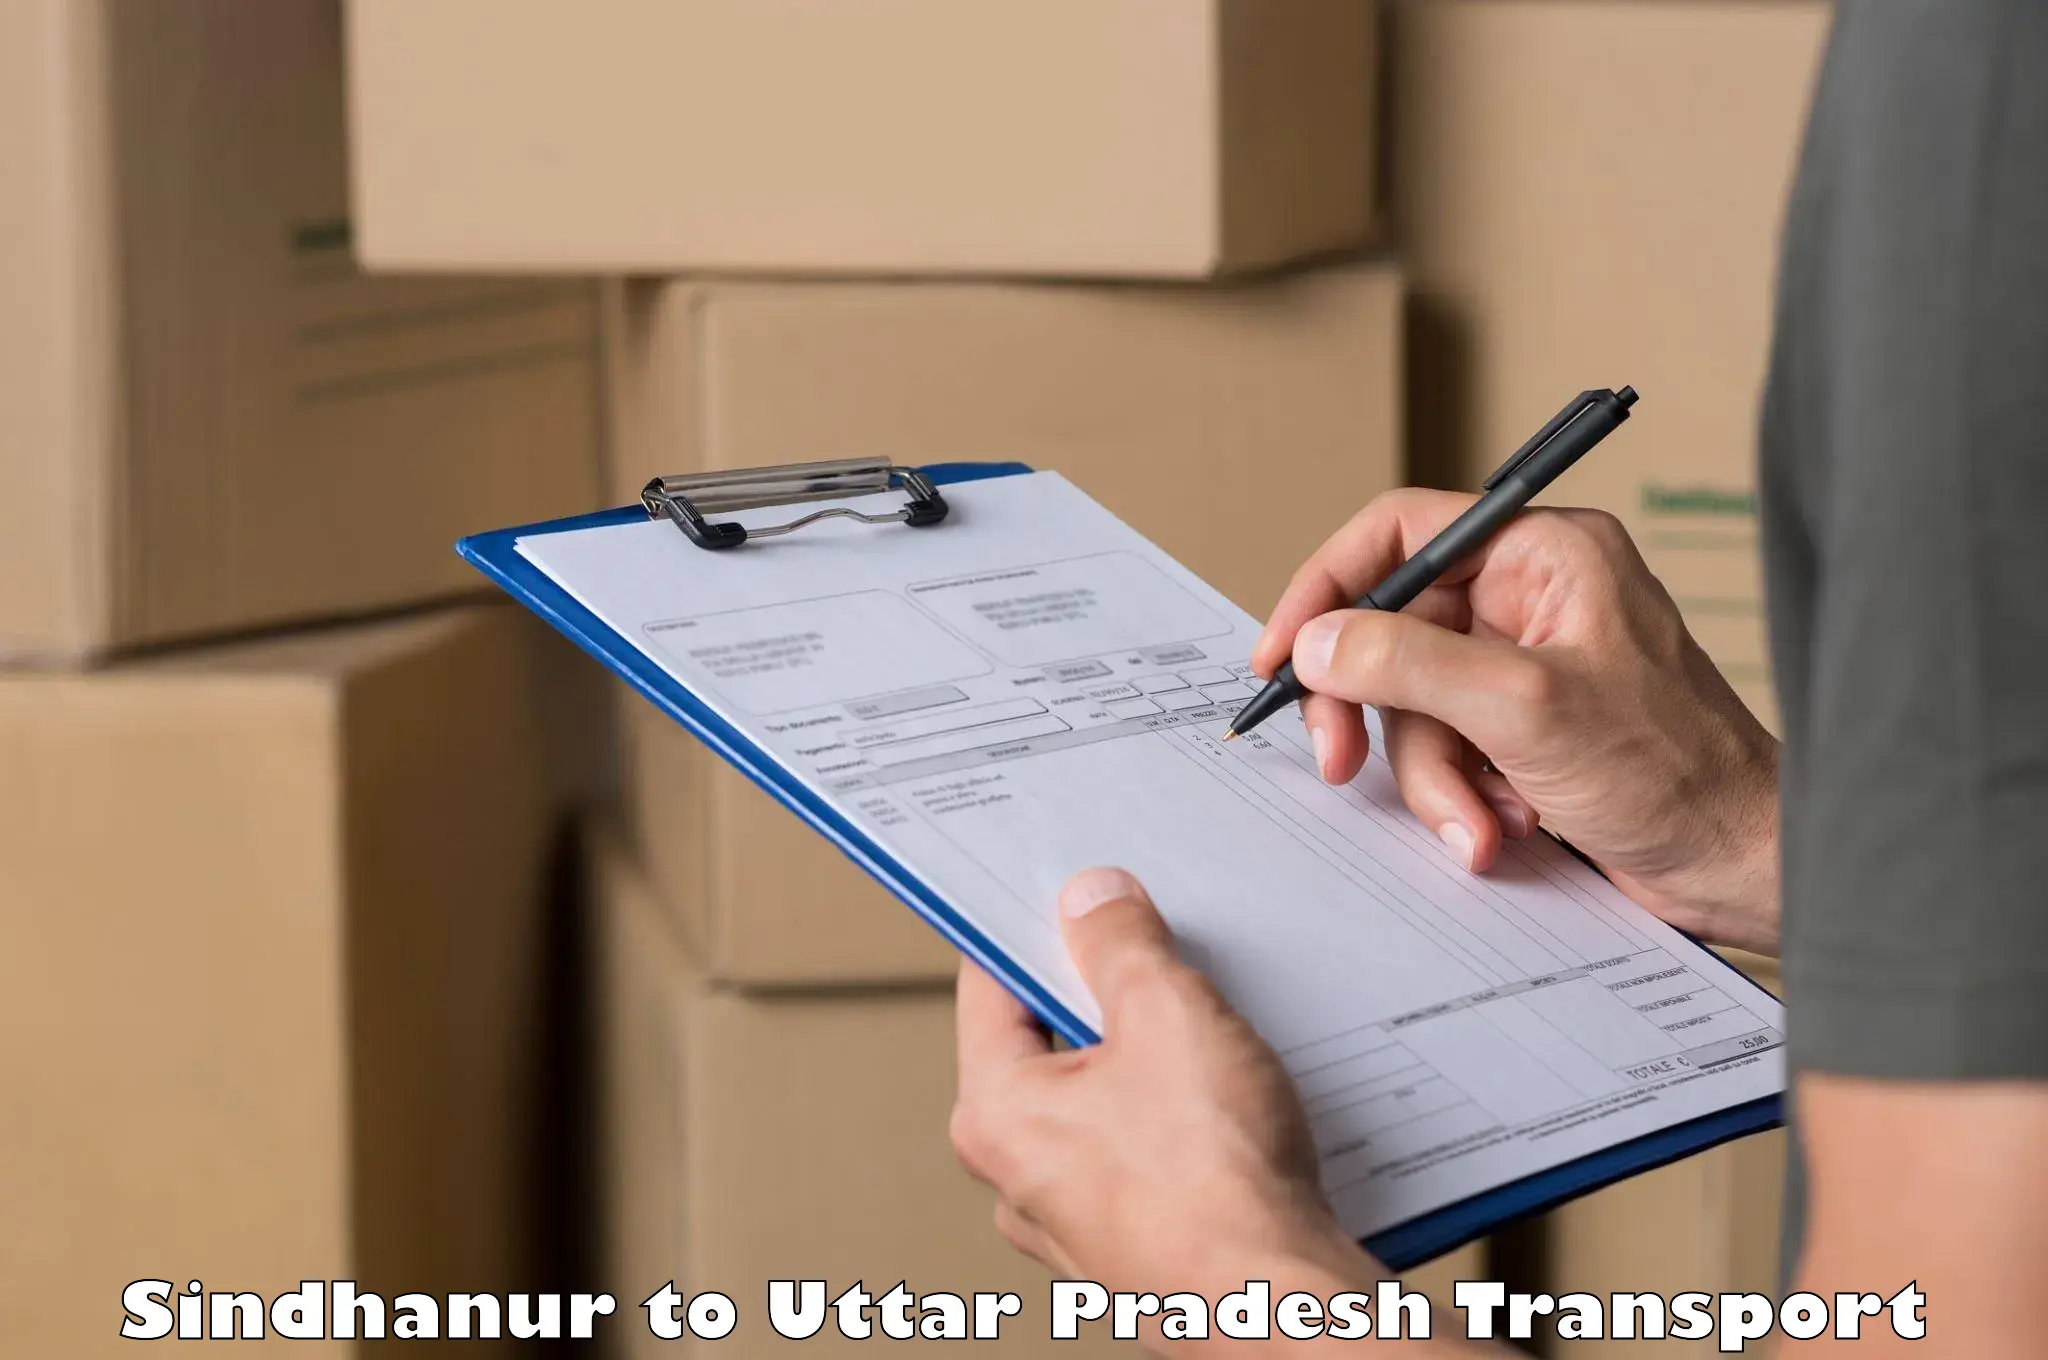 Vehicle transport services in Sindhanur to King Georges Medical University Lucknow